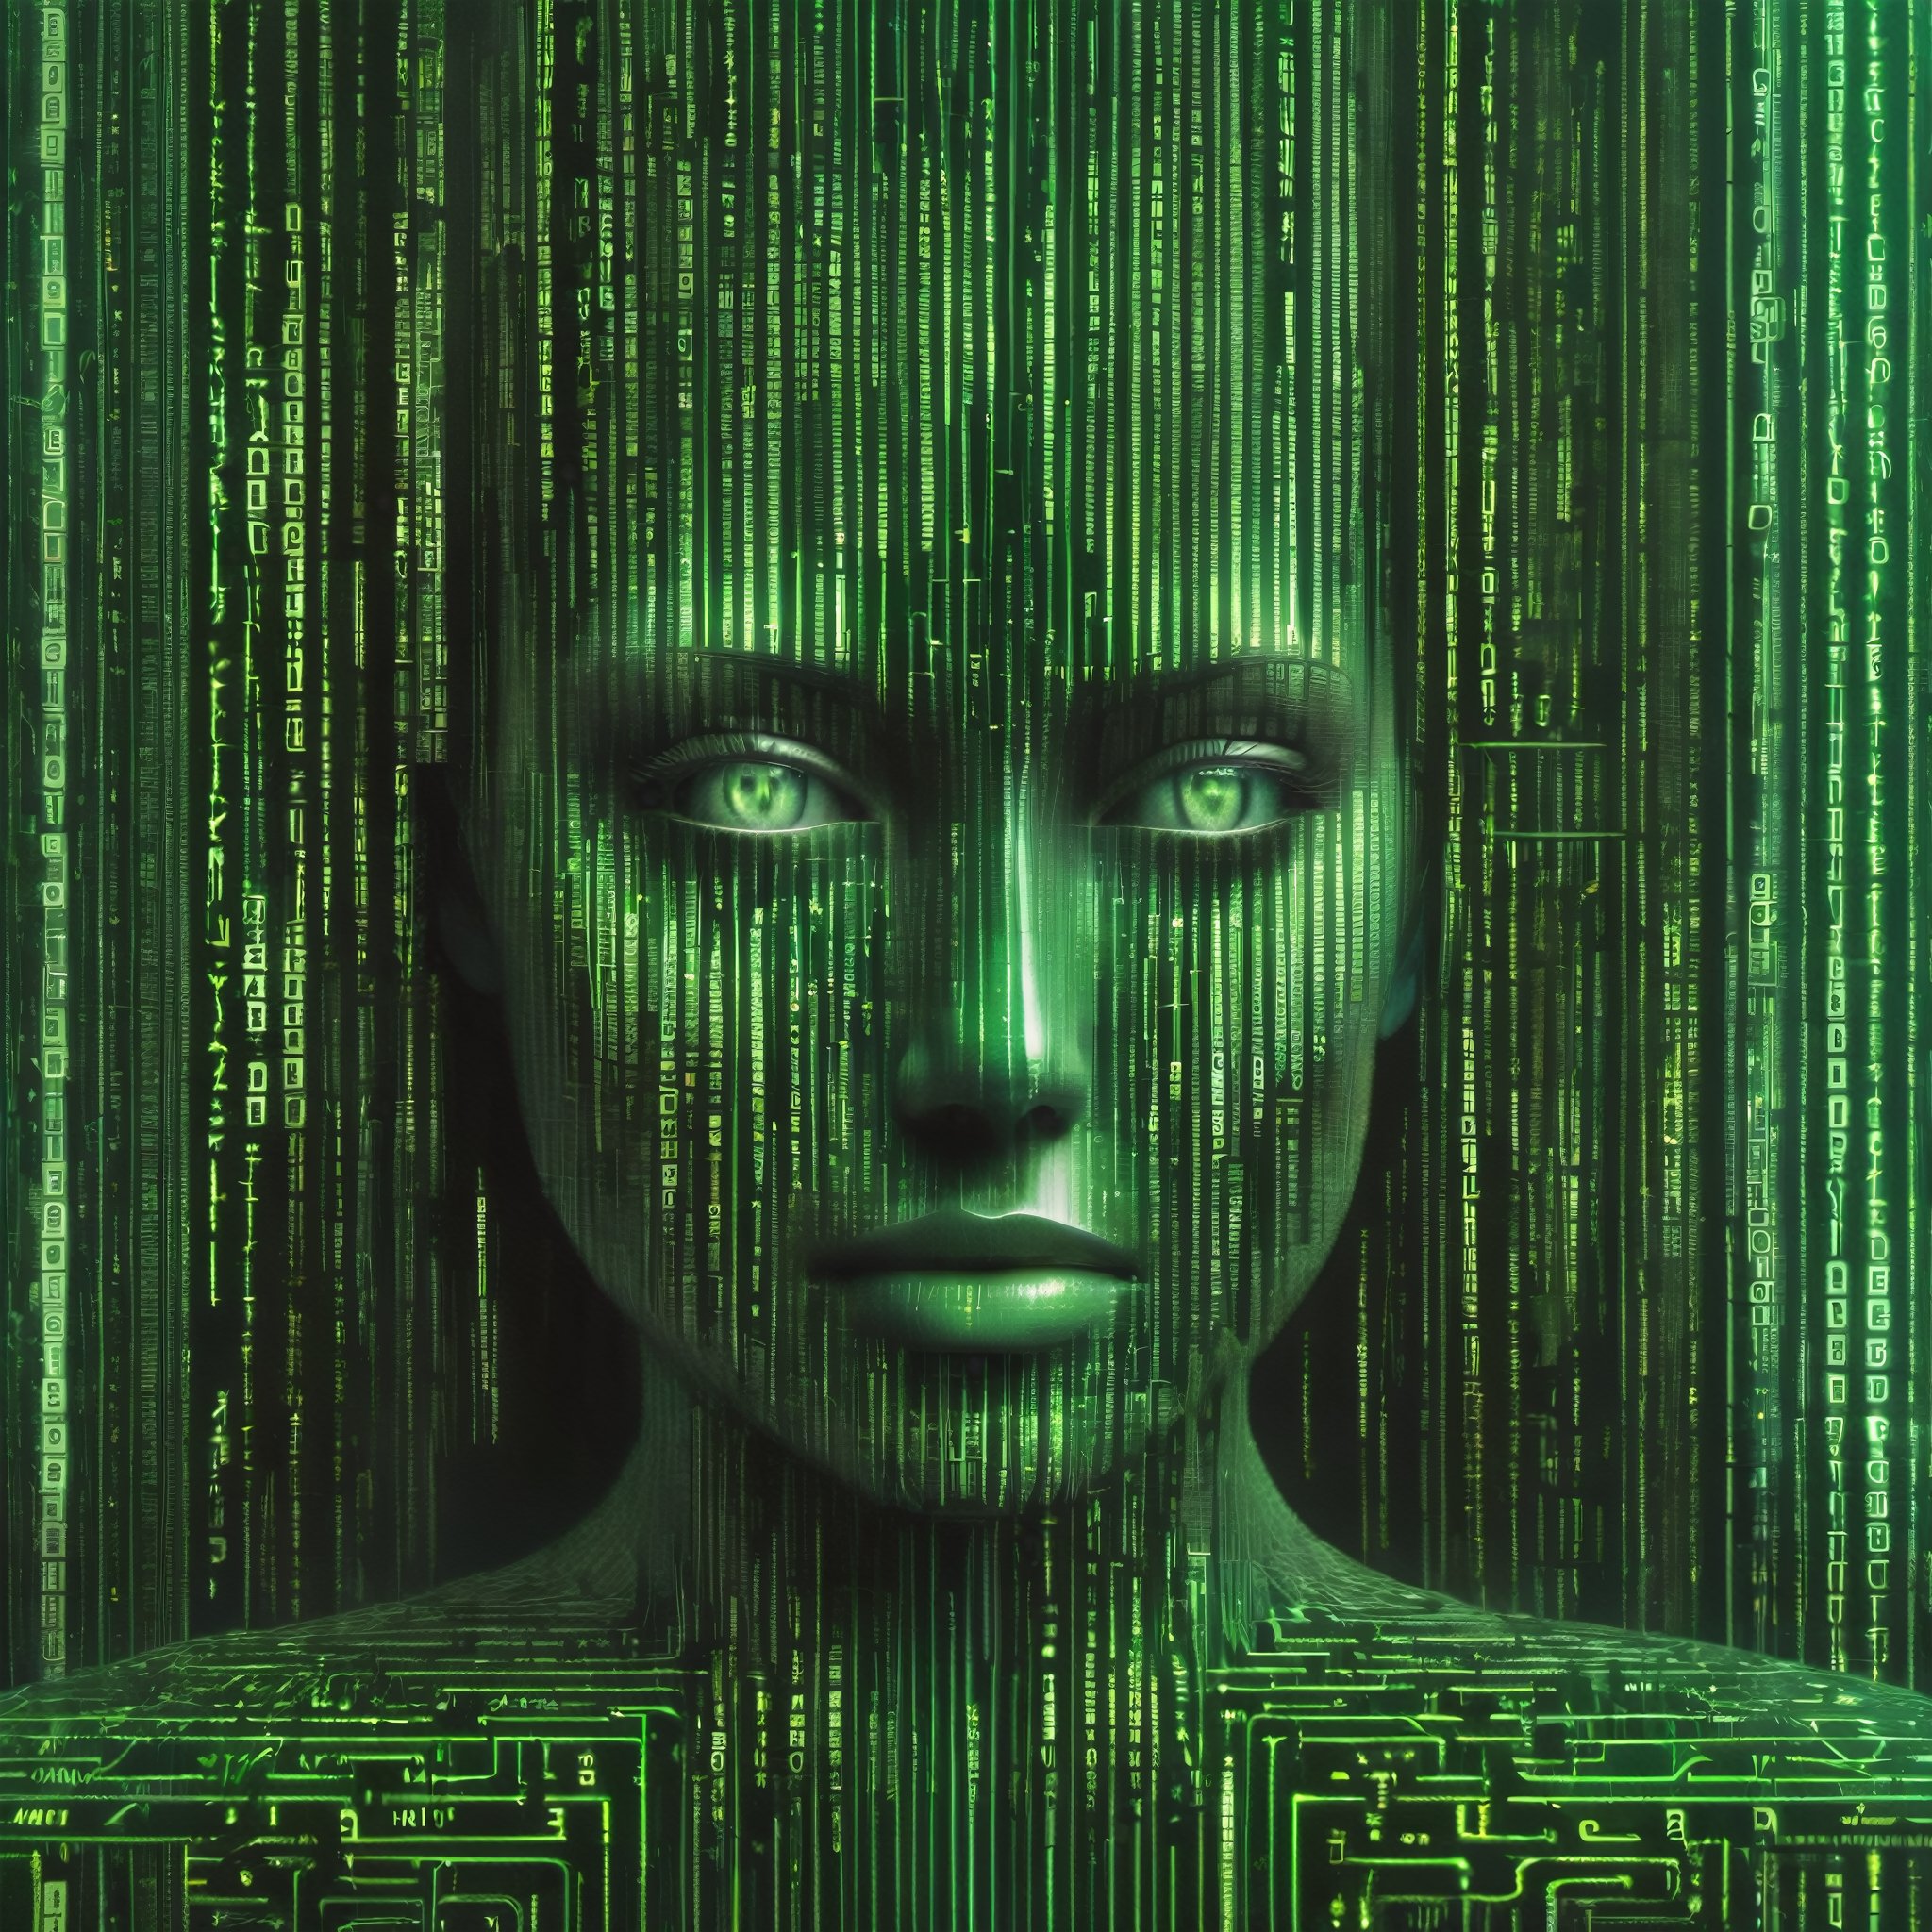 everything is made of vertical matrix code. A detailed close up of a Matrix code woman's face.